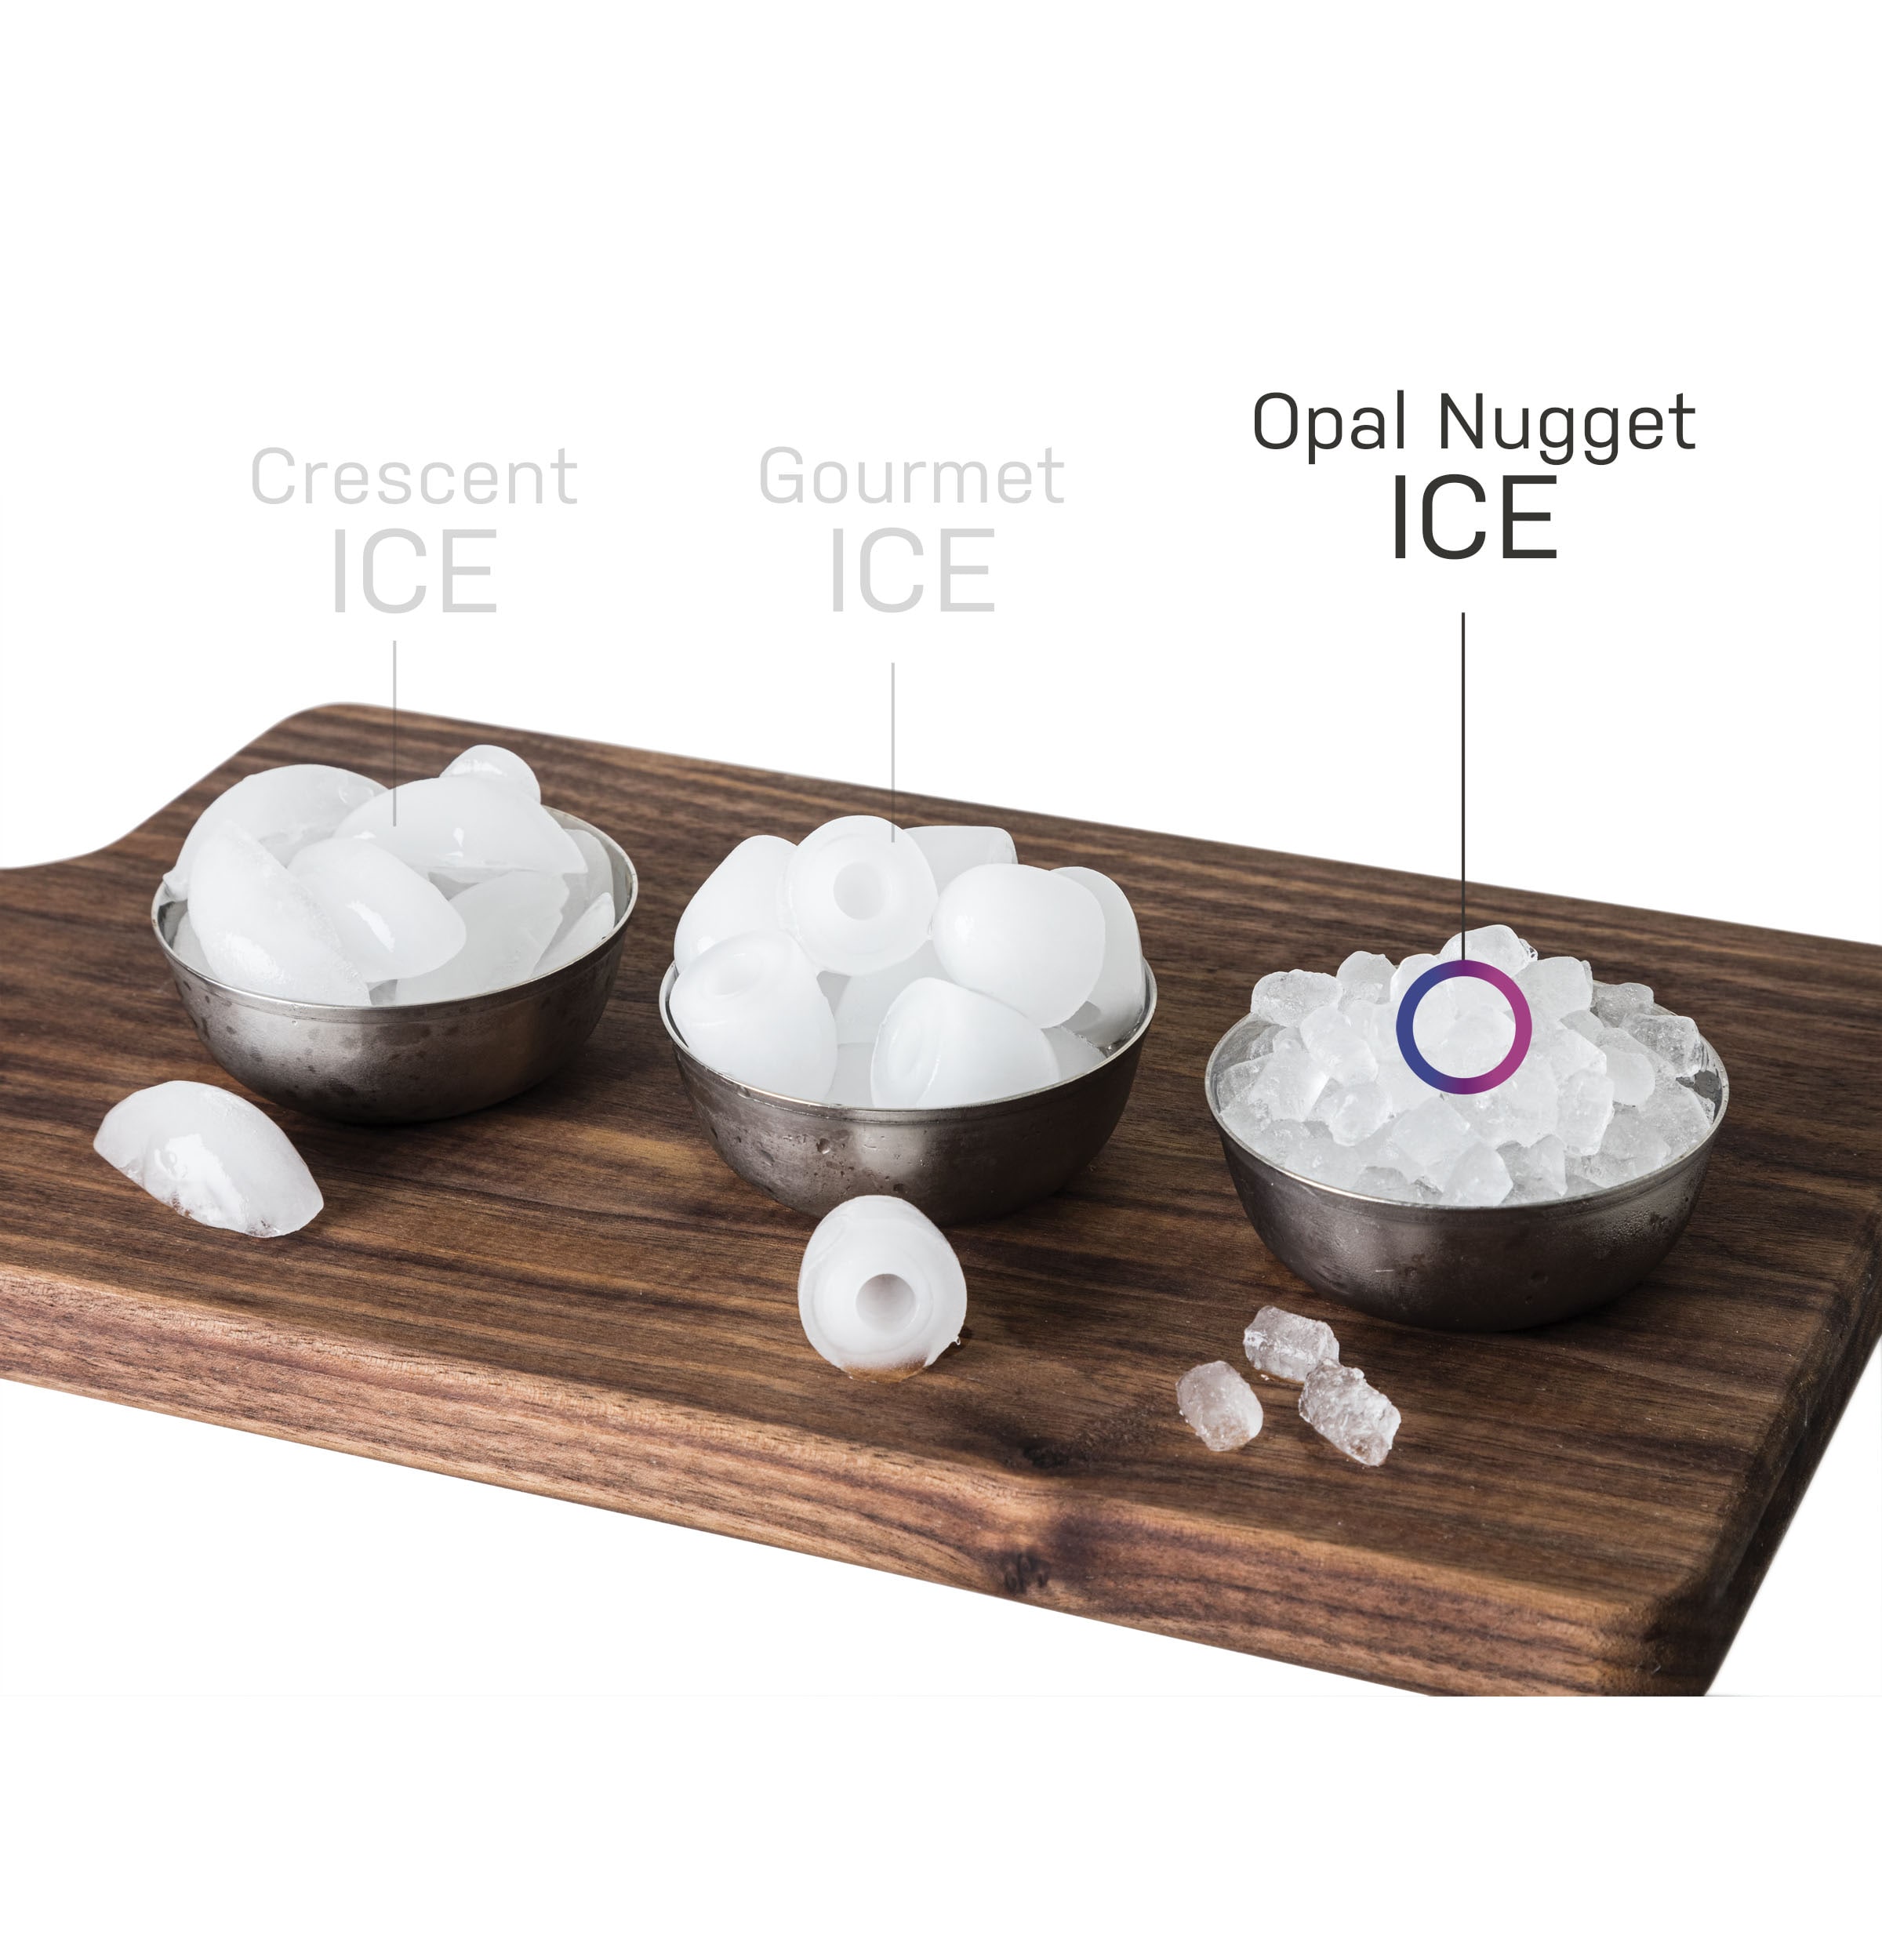 Opal is an Affordable Nugget Ice Maker for Your Home